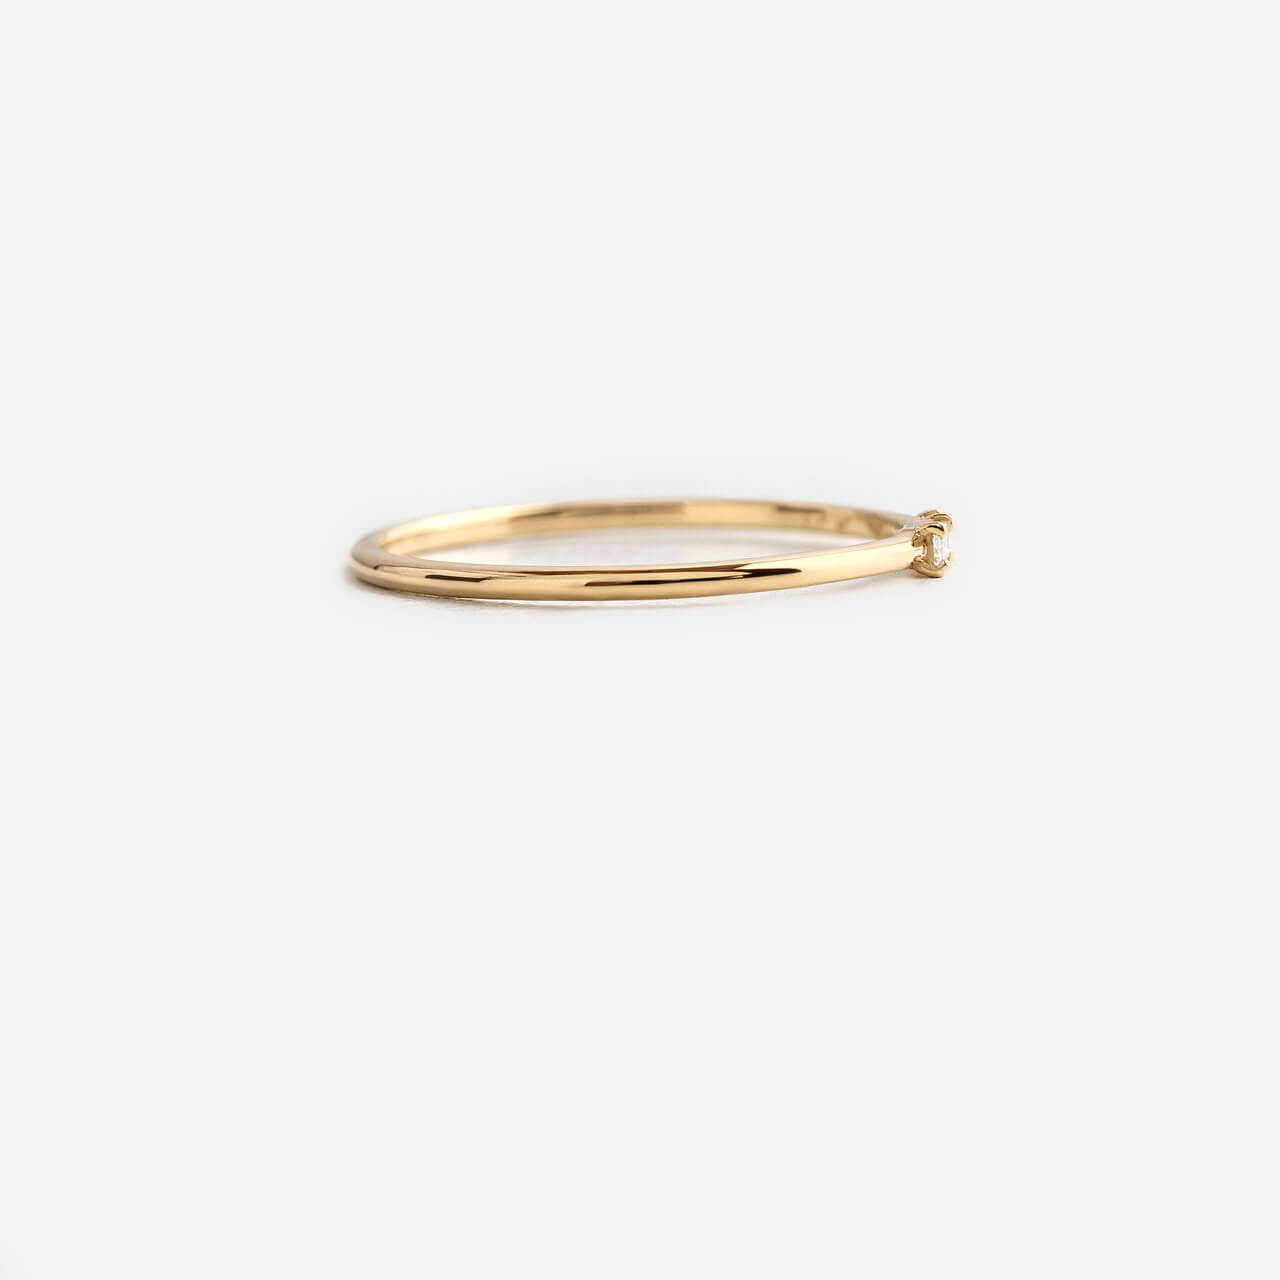 Morse Code Ring, Yellow Gold - Letter "A"